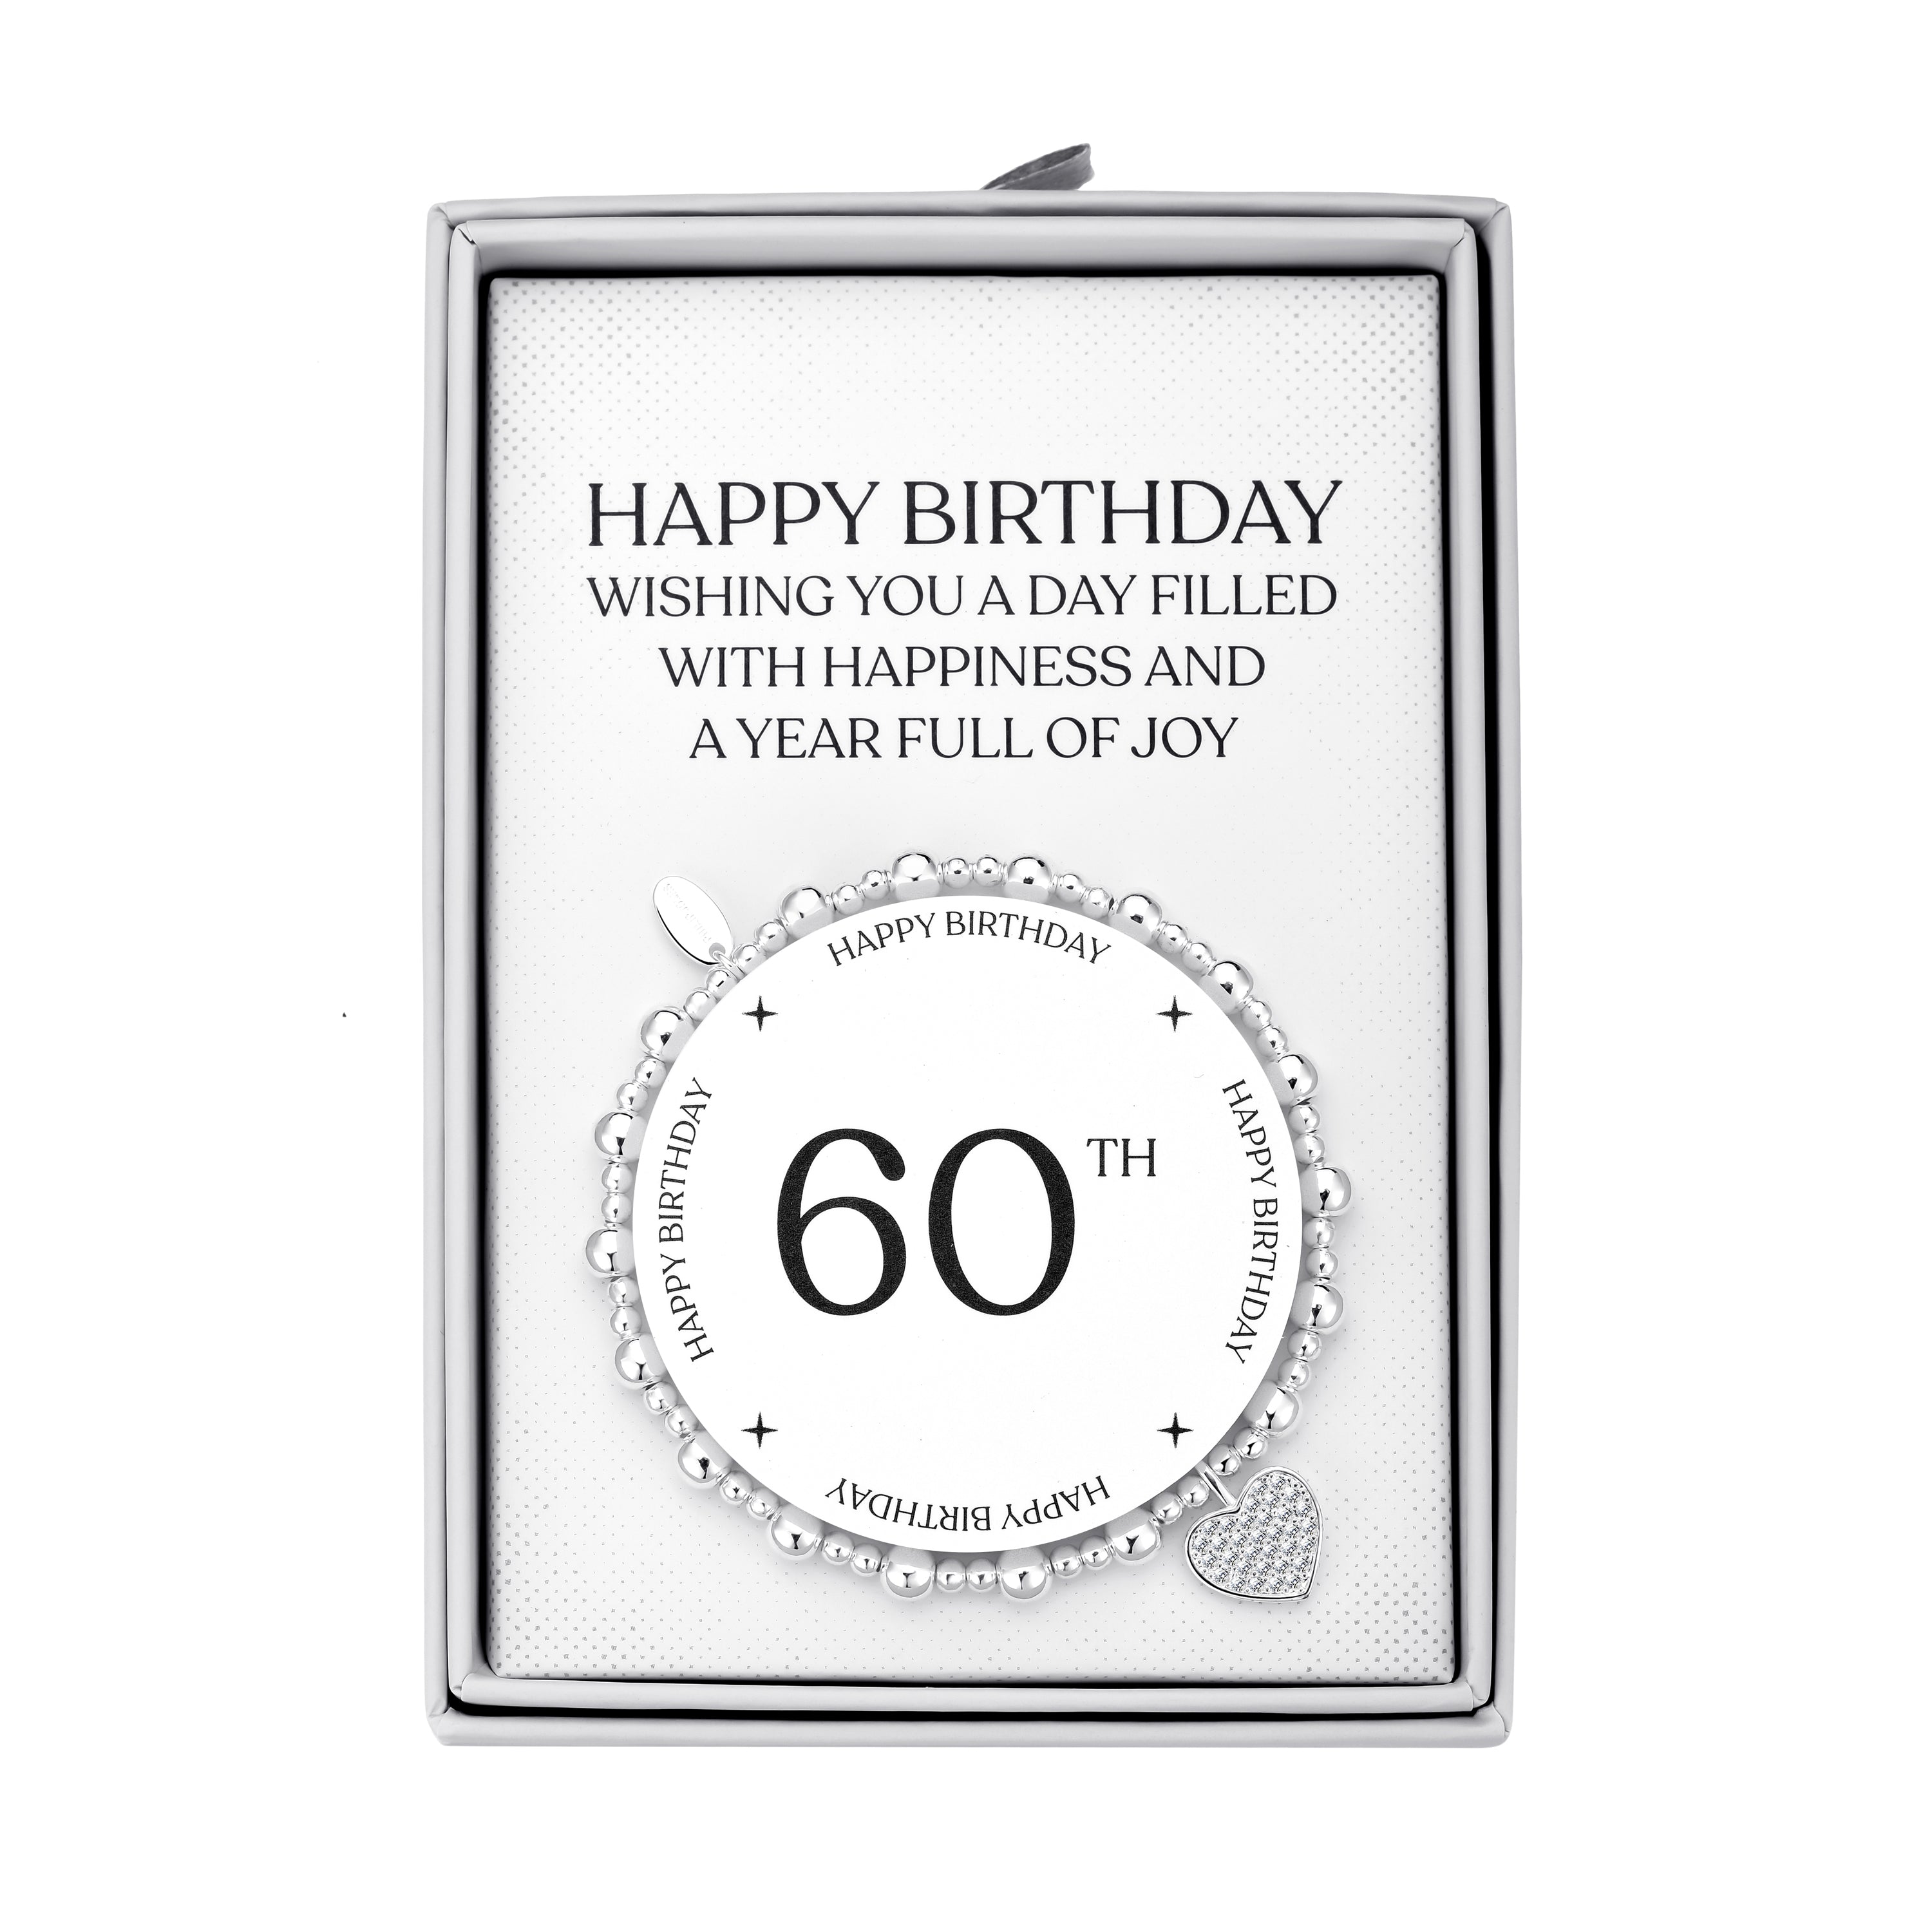 60th Birthday Heart Charm Stretch Bracelet with Quote Gift Box by Philip Jones Jewellery